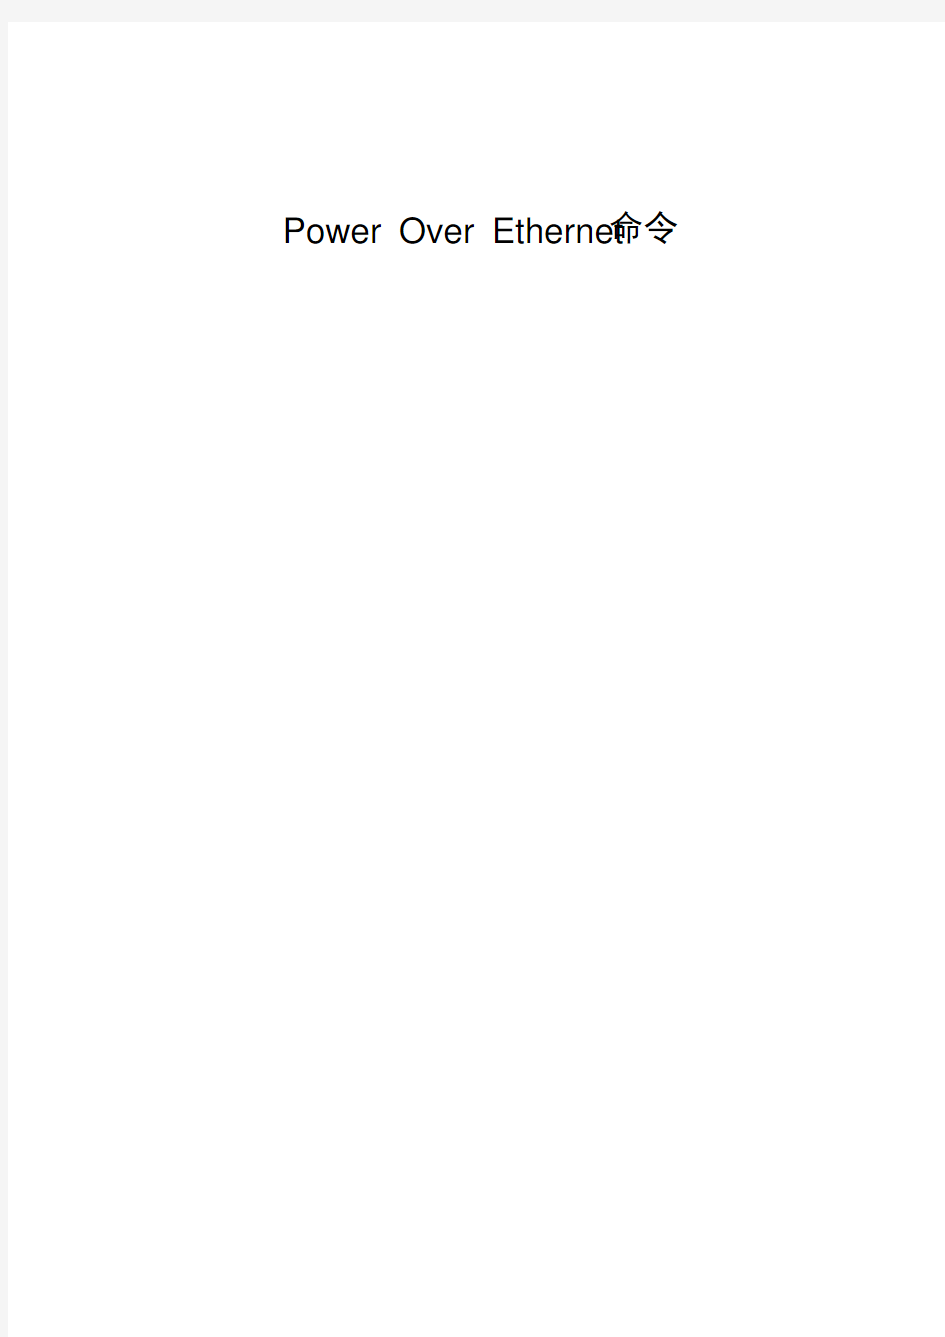 11-Power Over Ethernet命令